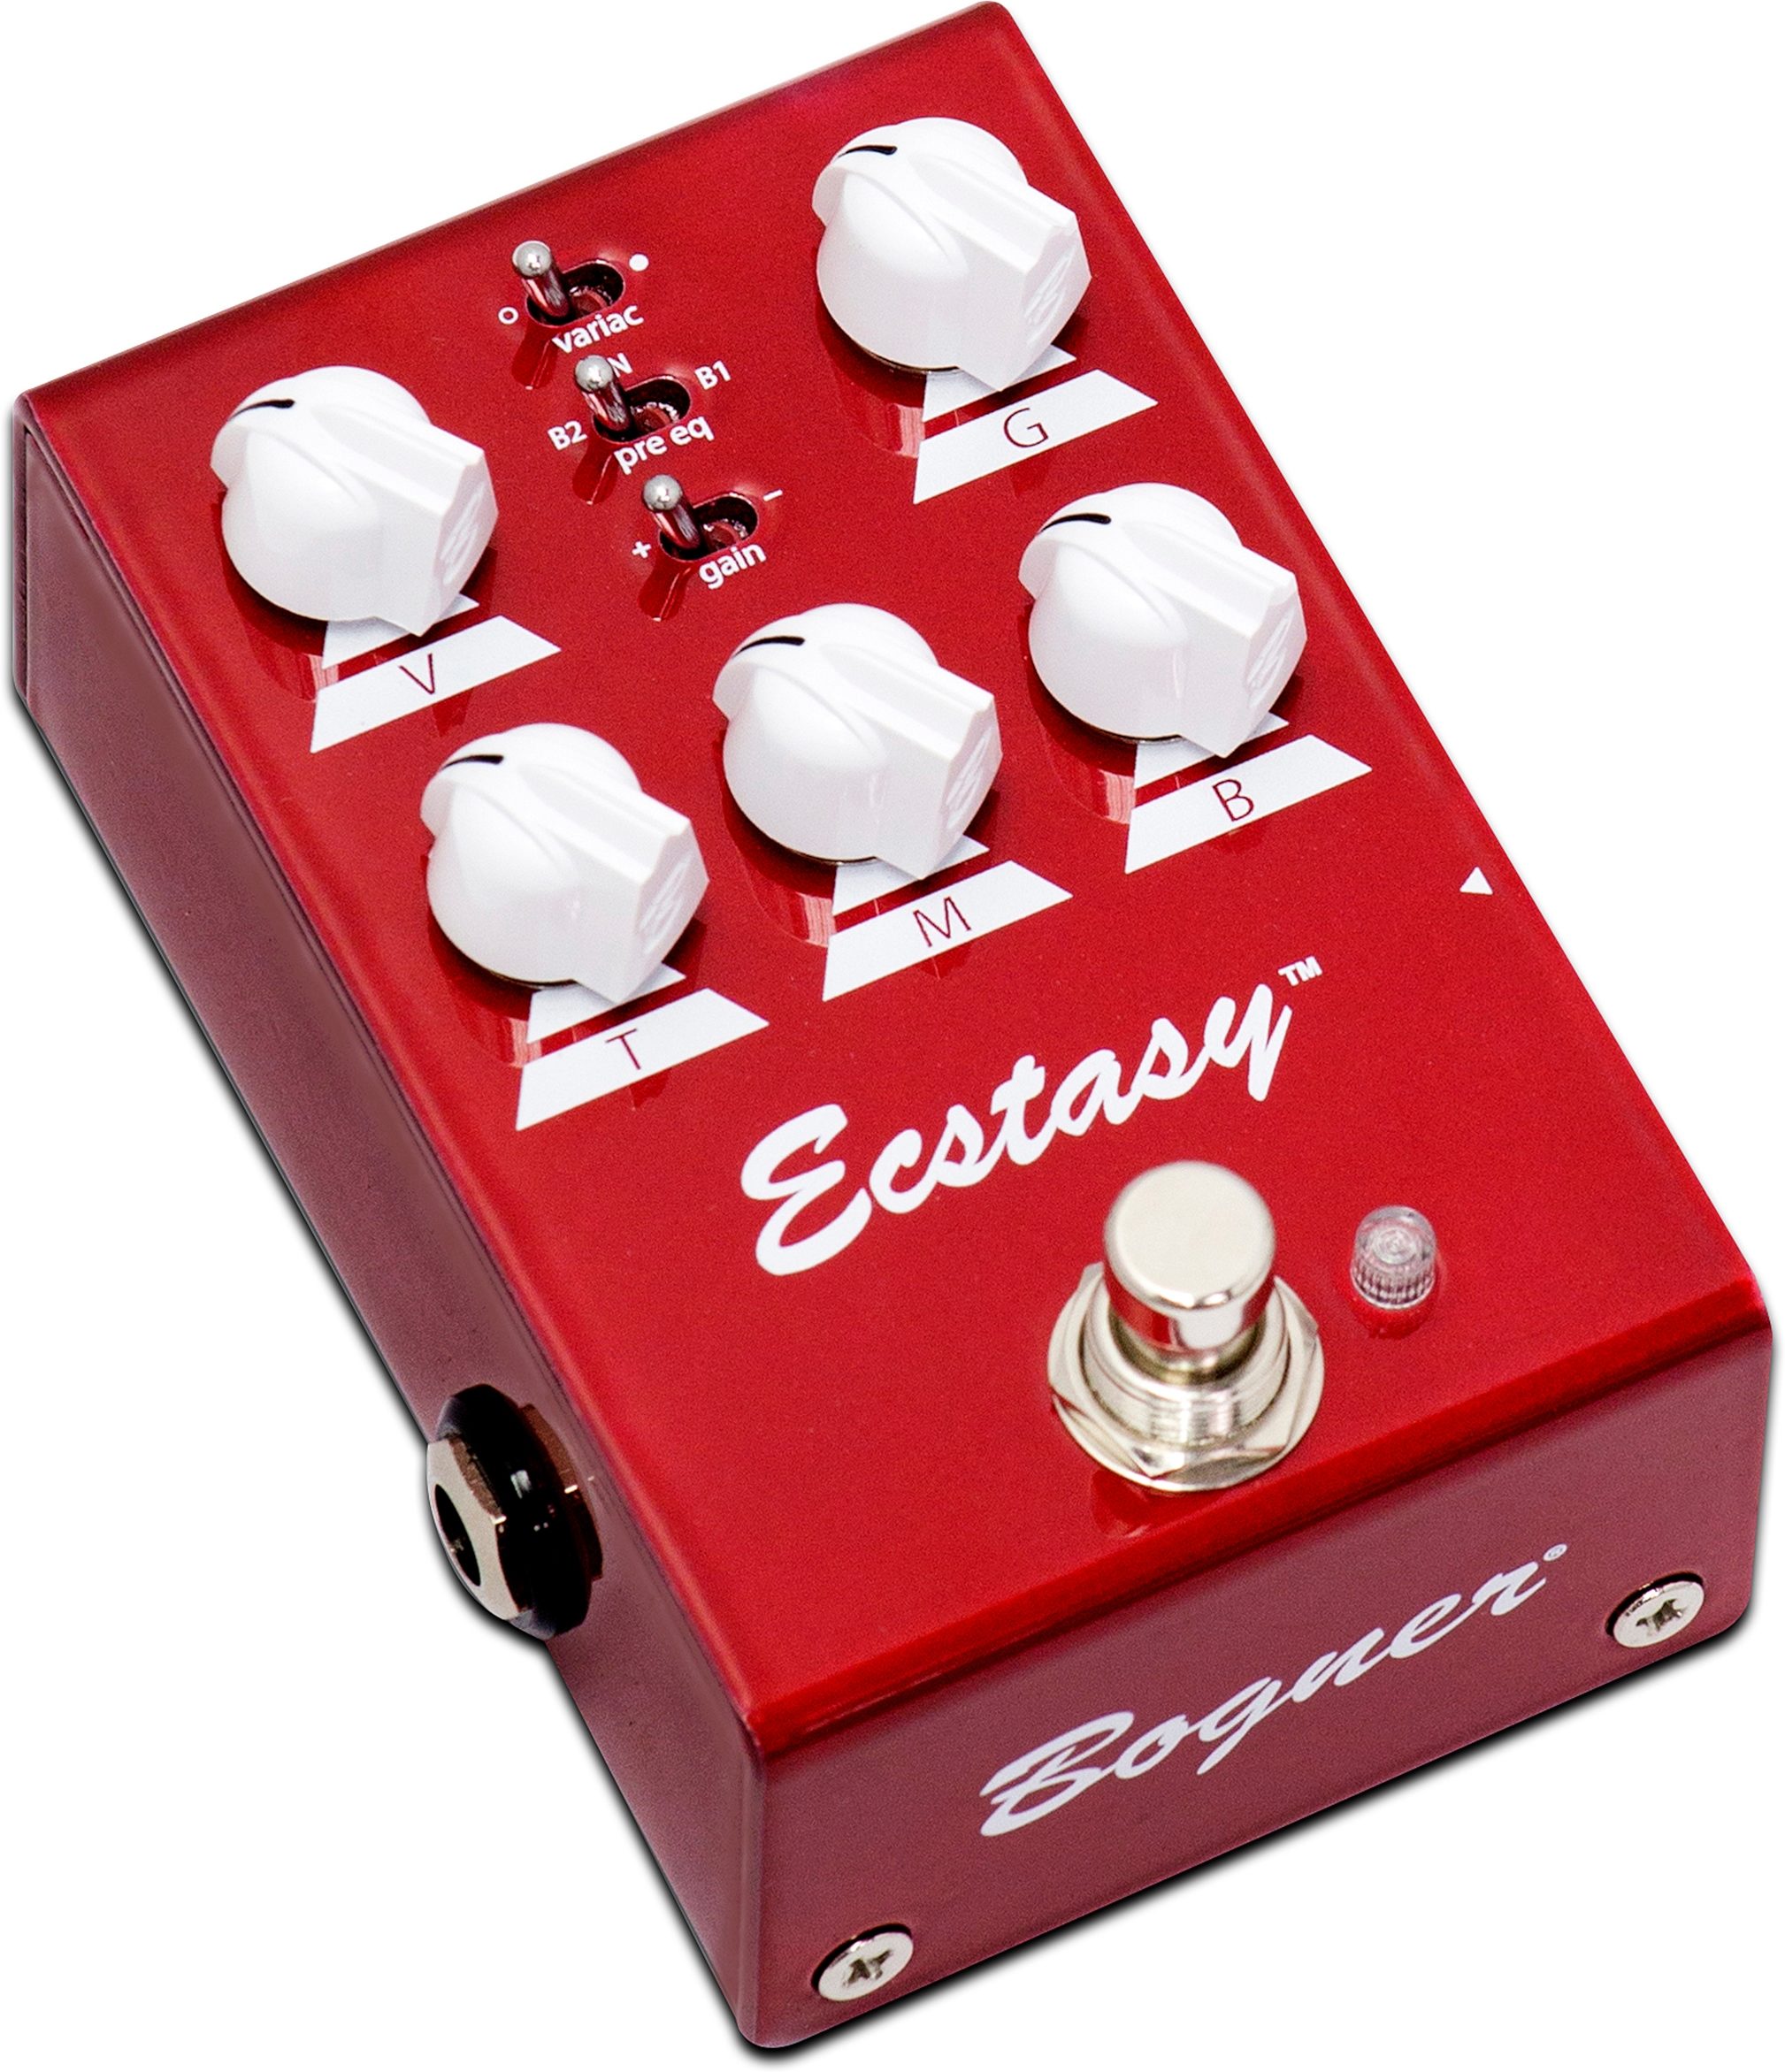 Bogner Ecstasy Red Mini Overdrive Pedal | zZounds